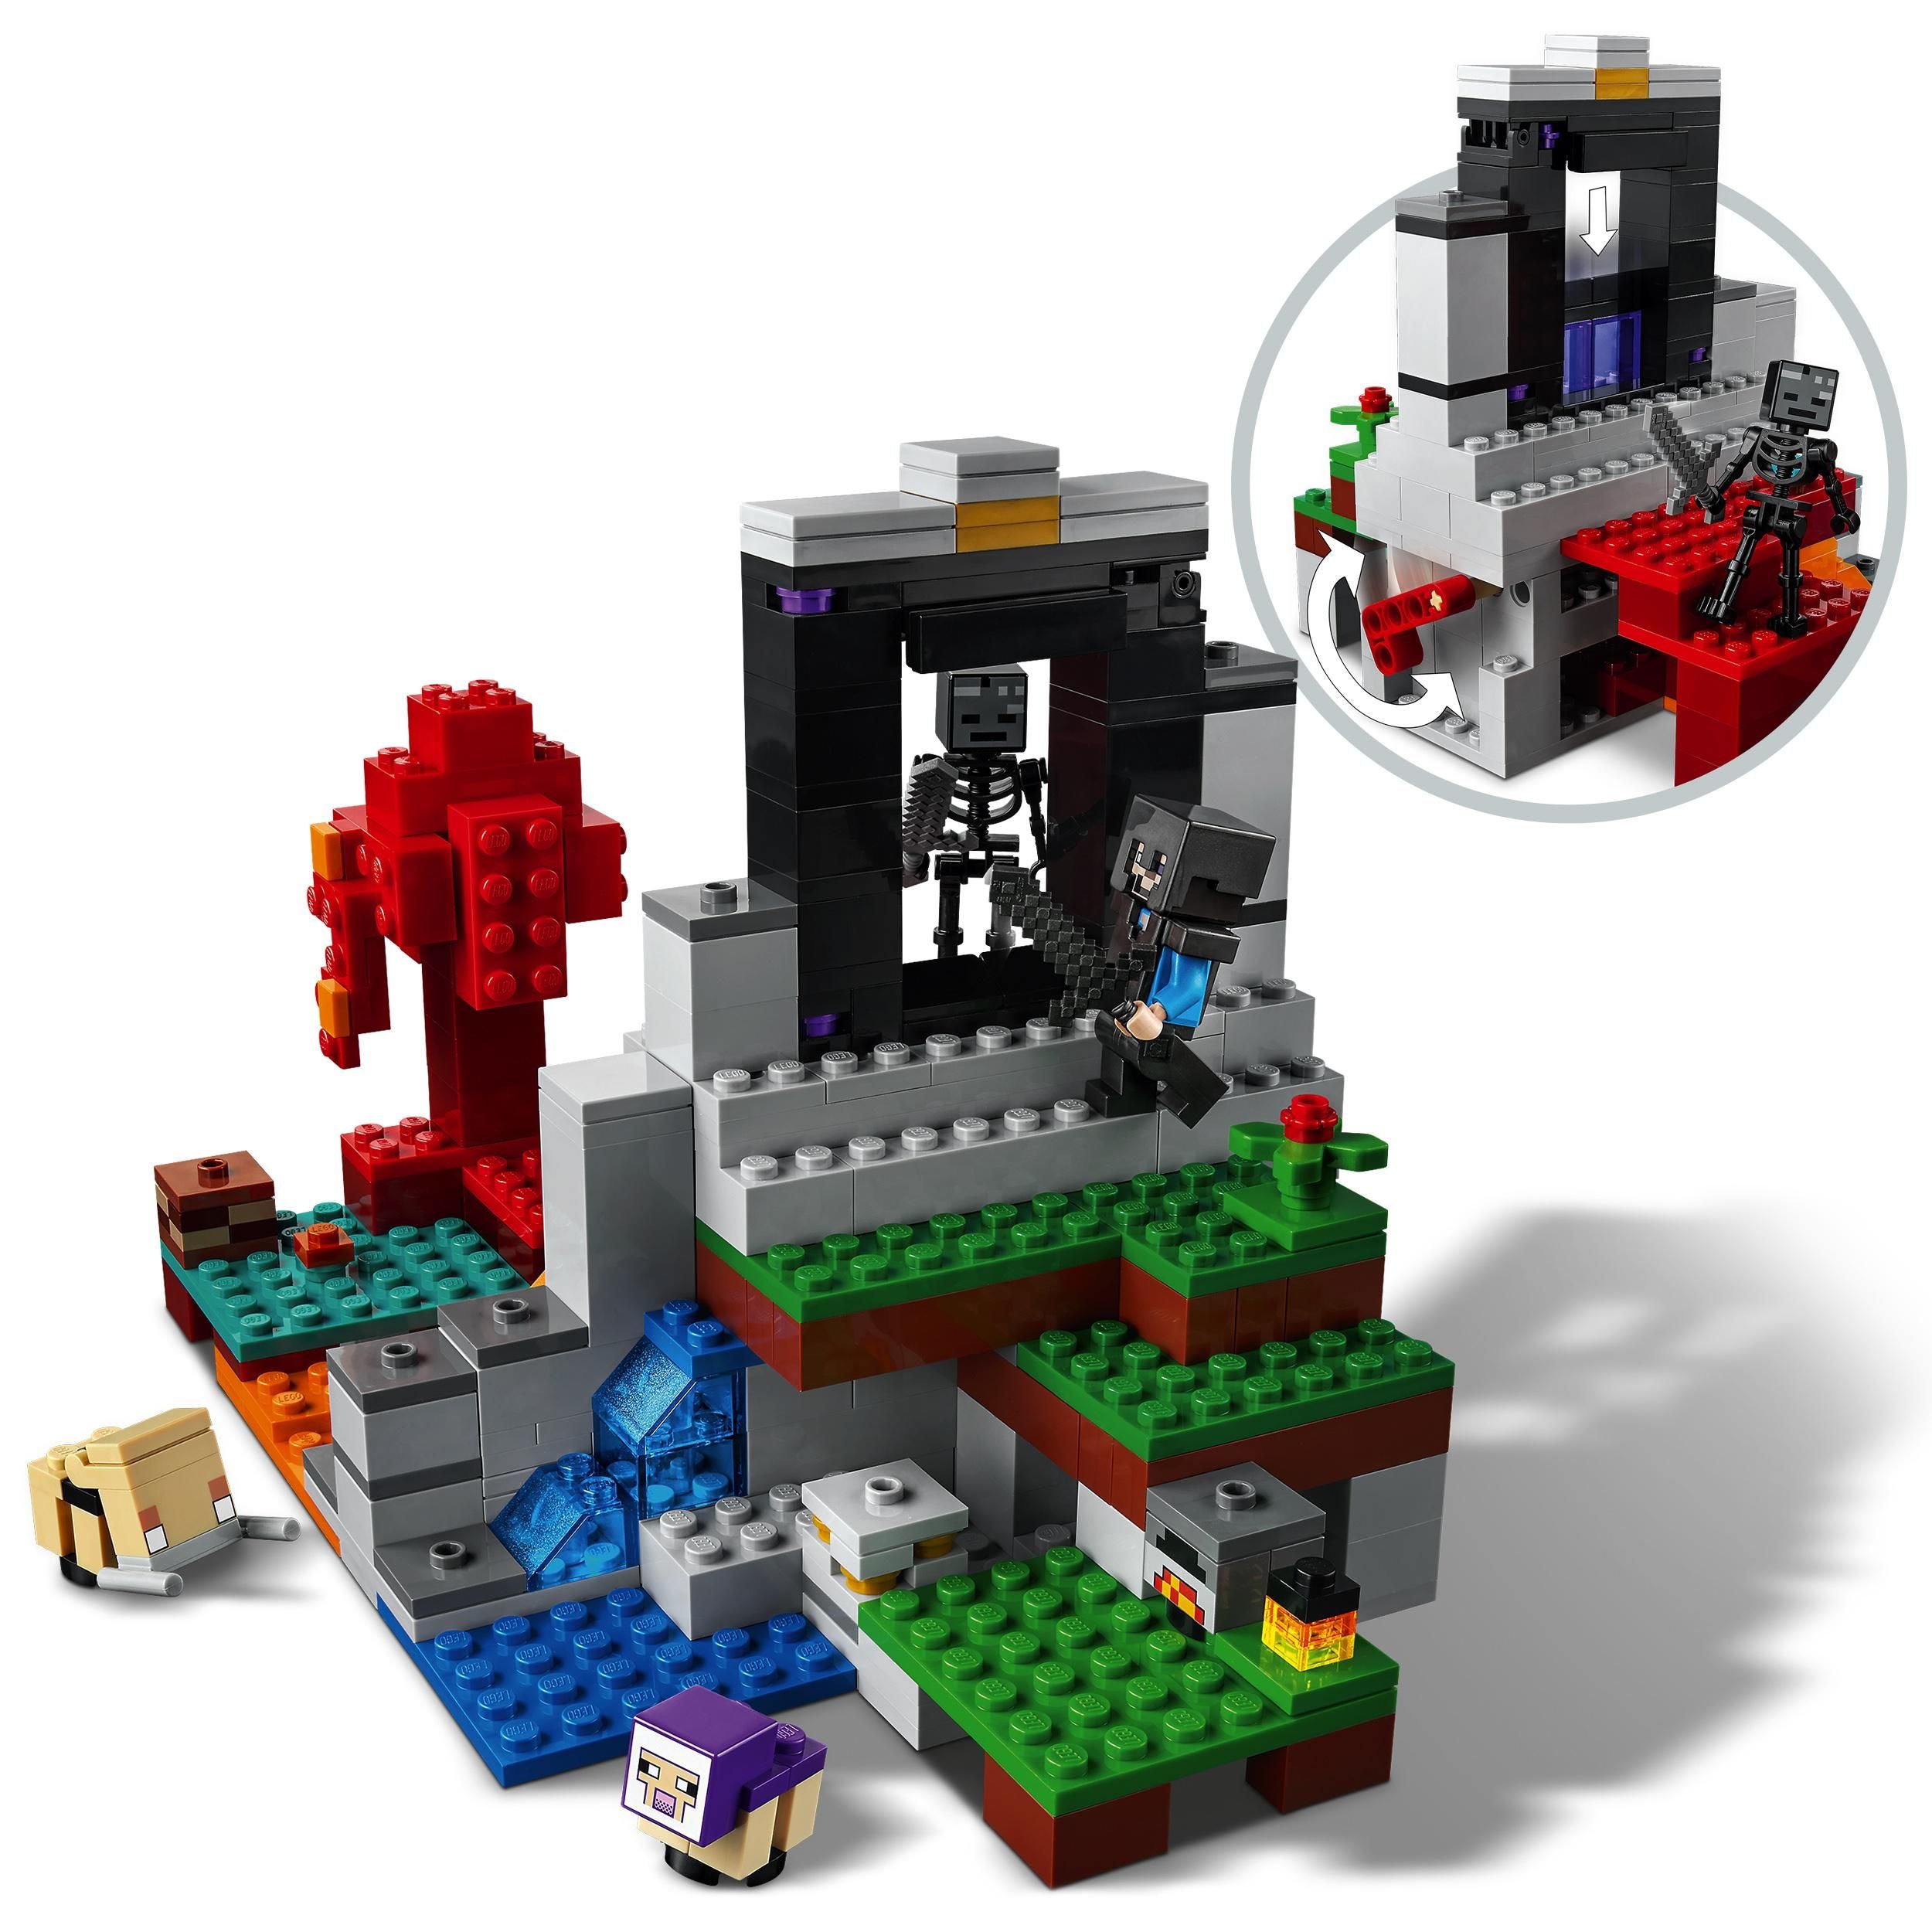 LEGO 21172 Minecraft The Ruined Portal Toy with Steve and Wither Skeleton Figures, Building Set for Kids 8 Years Old